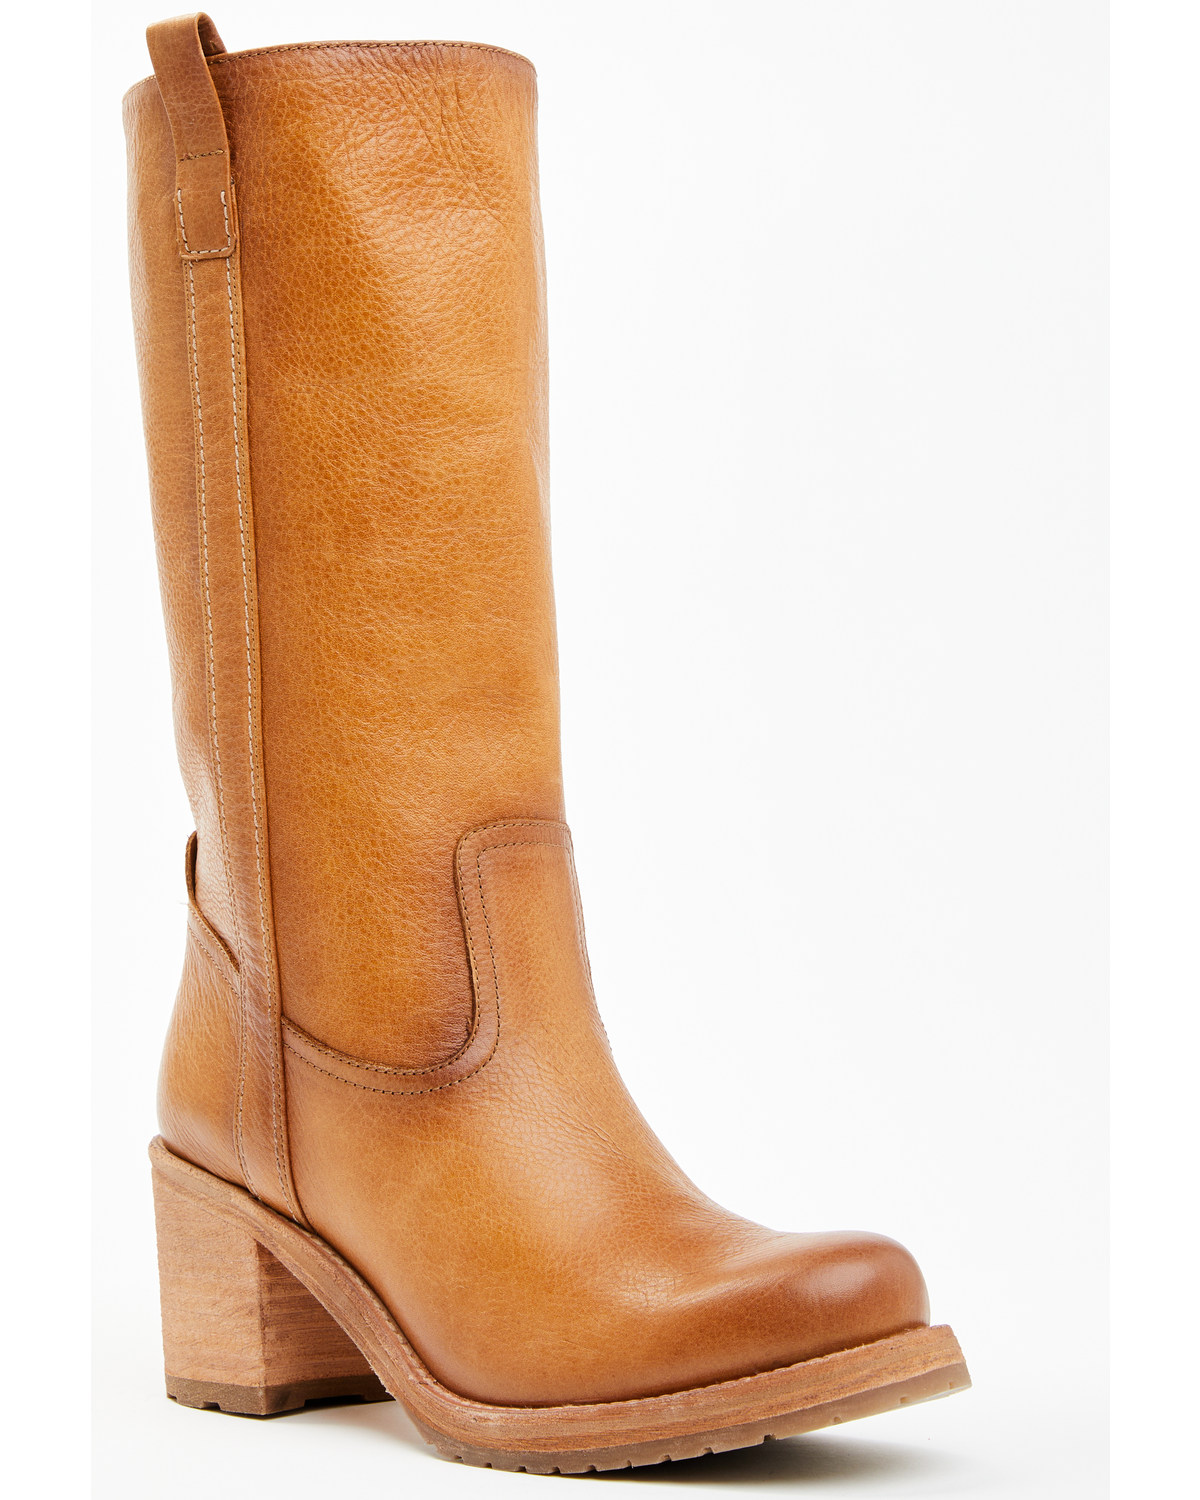 Cleo + Wolf Women's Scout Western Boots - Round Toe